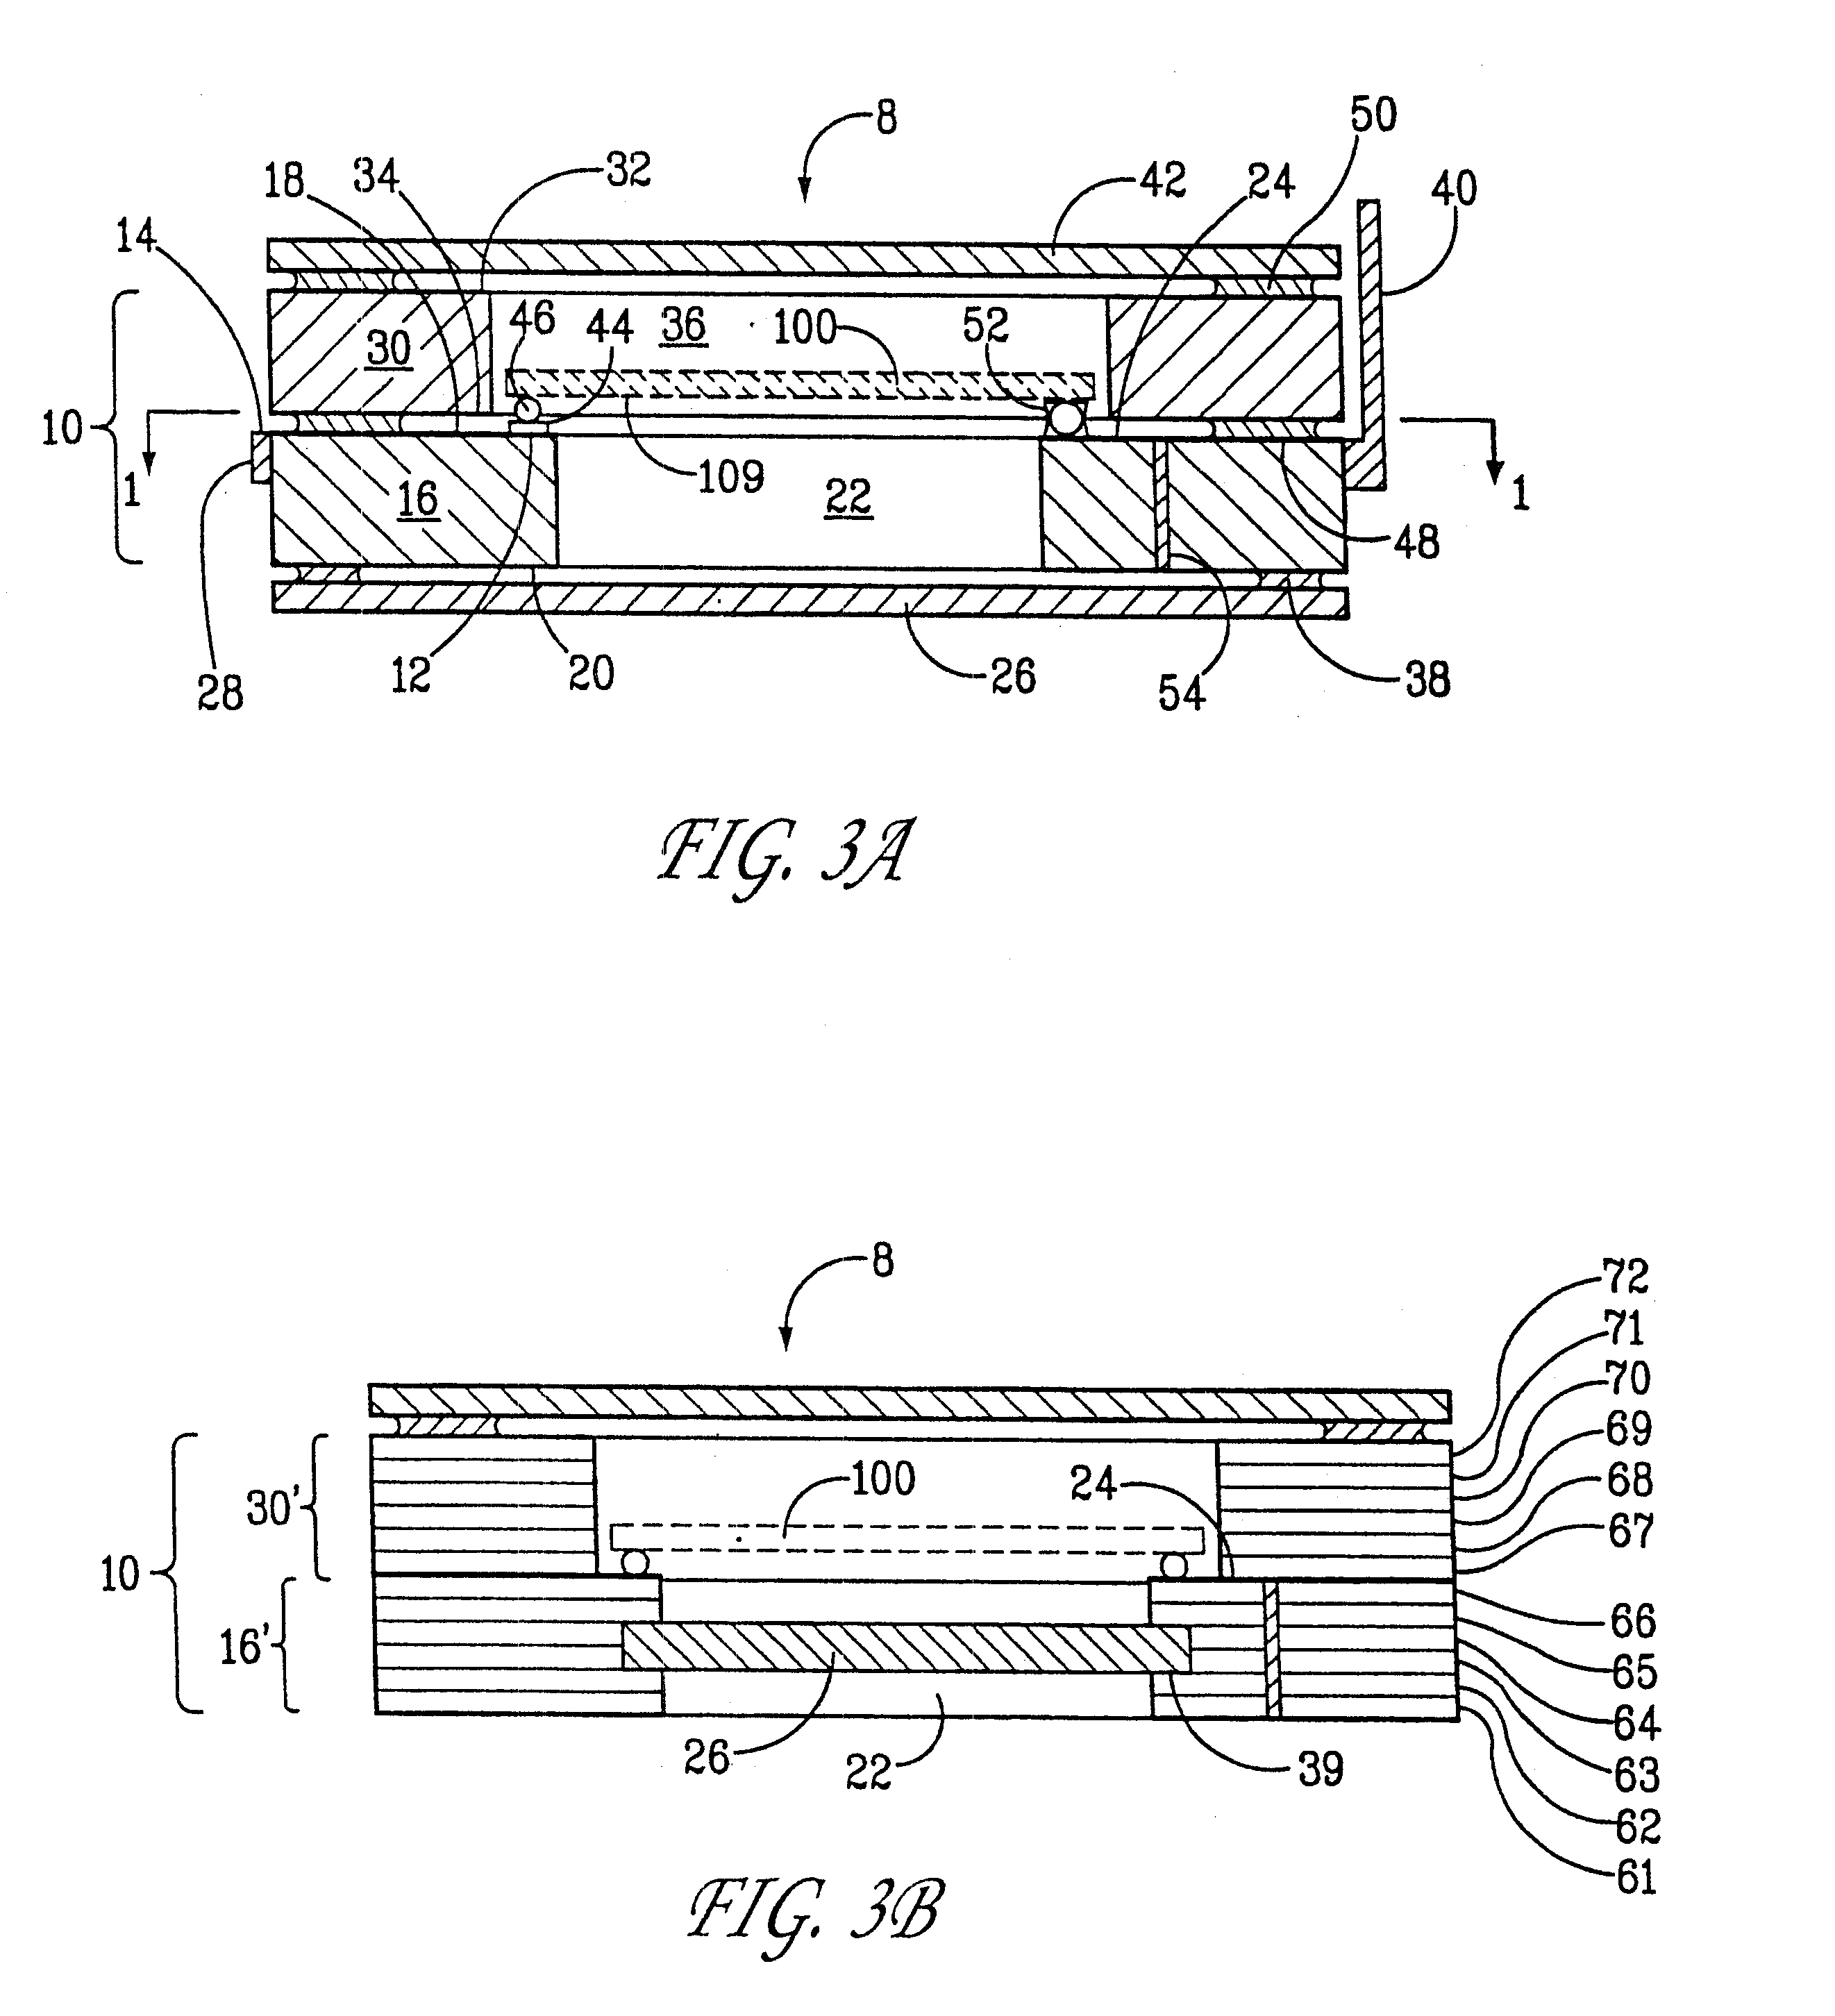 Bi-level multilayered microelectronic device package with an integral window